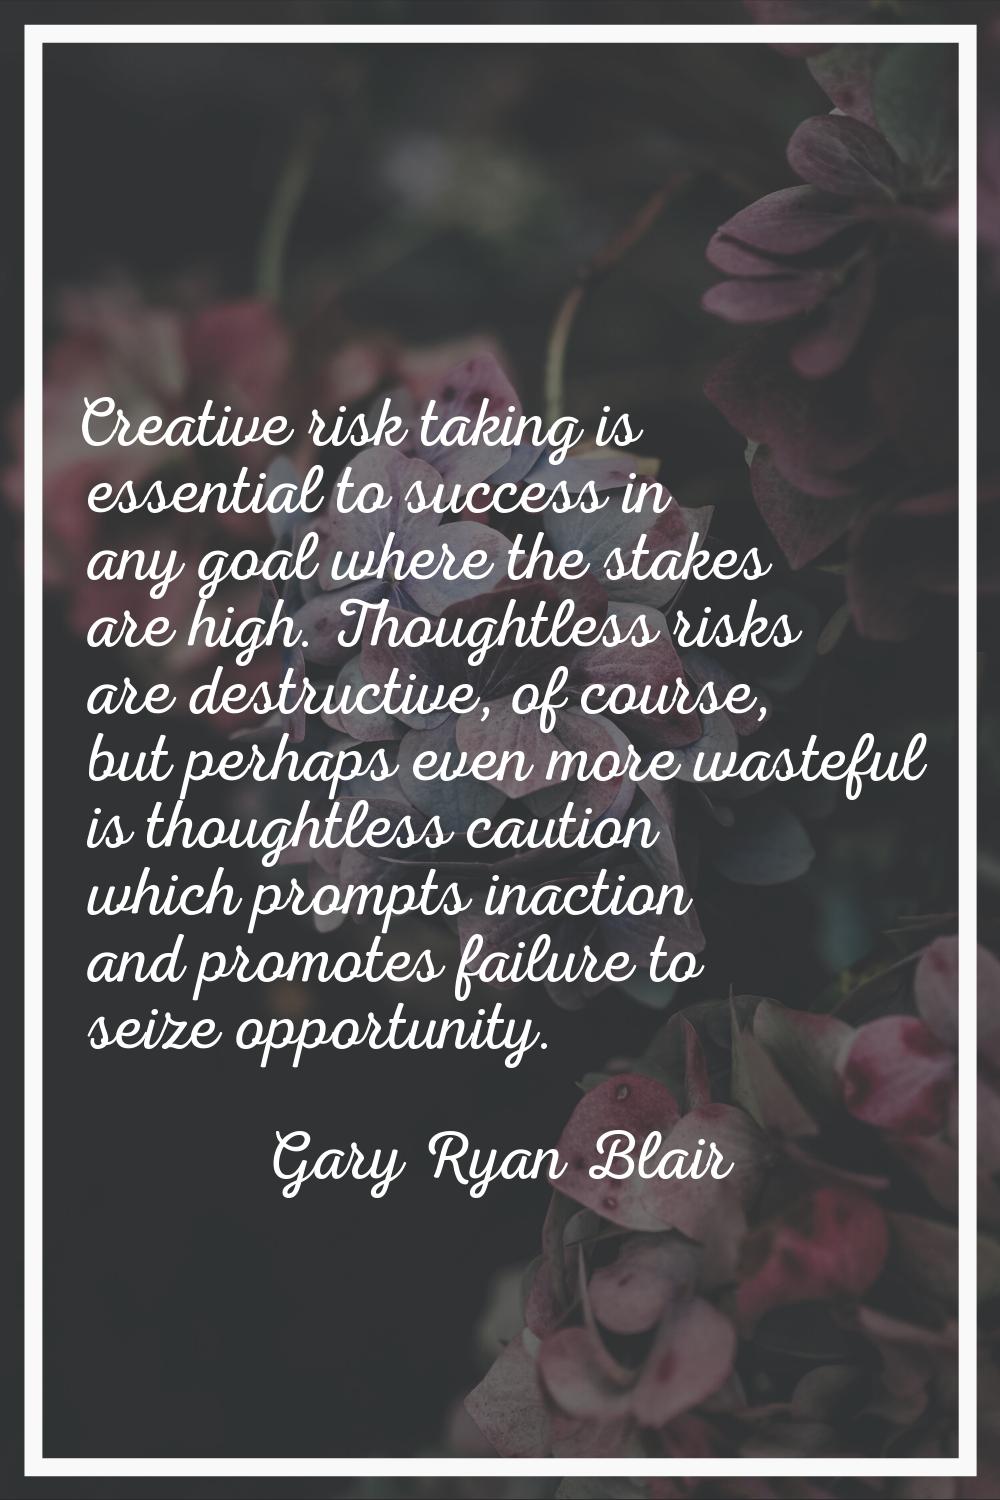 Creative risk taking is essential to success in any goal where the stakes are high. Thoughtless ris